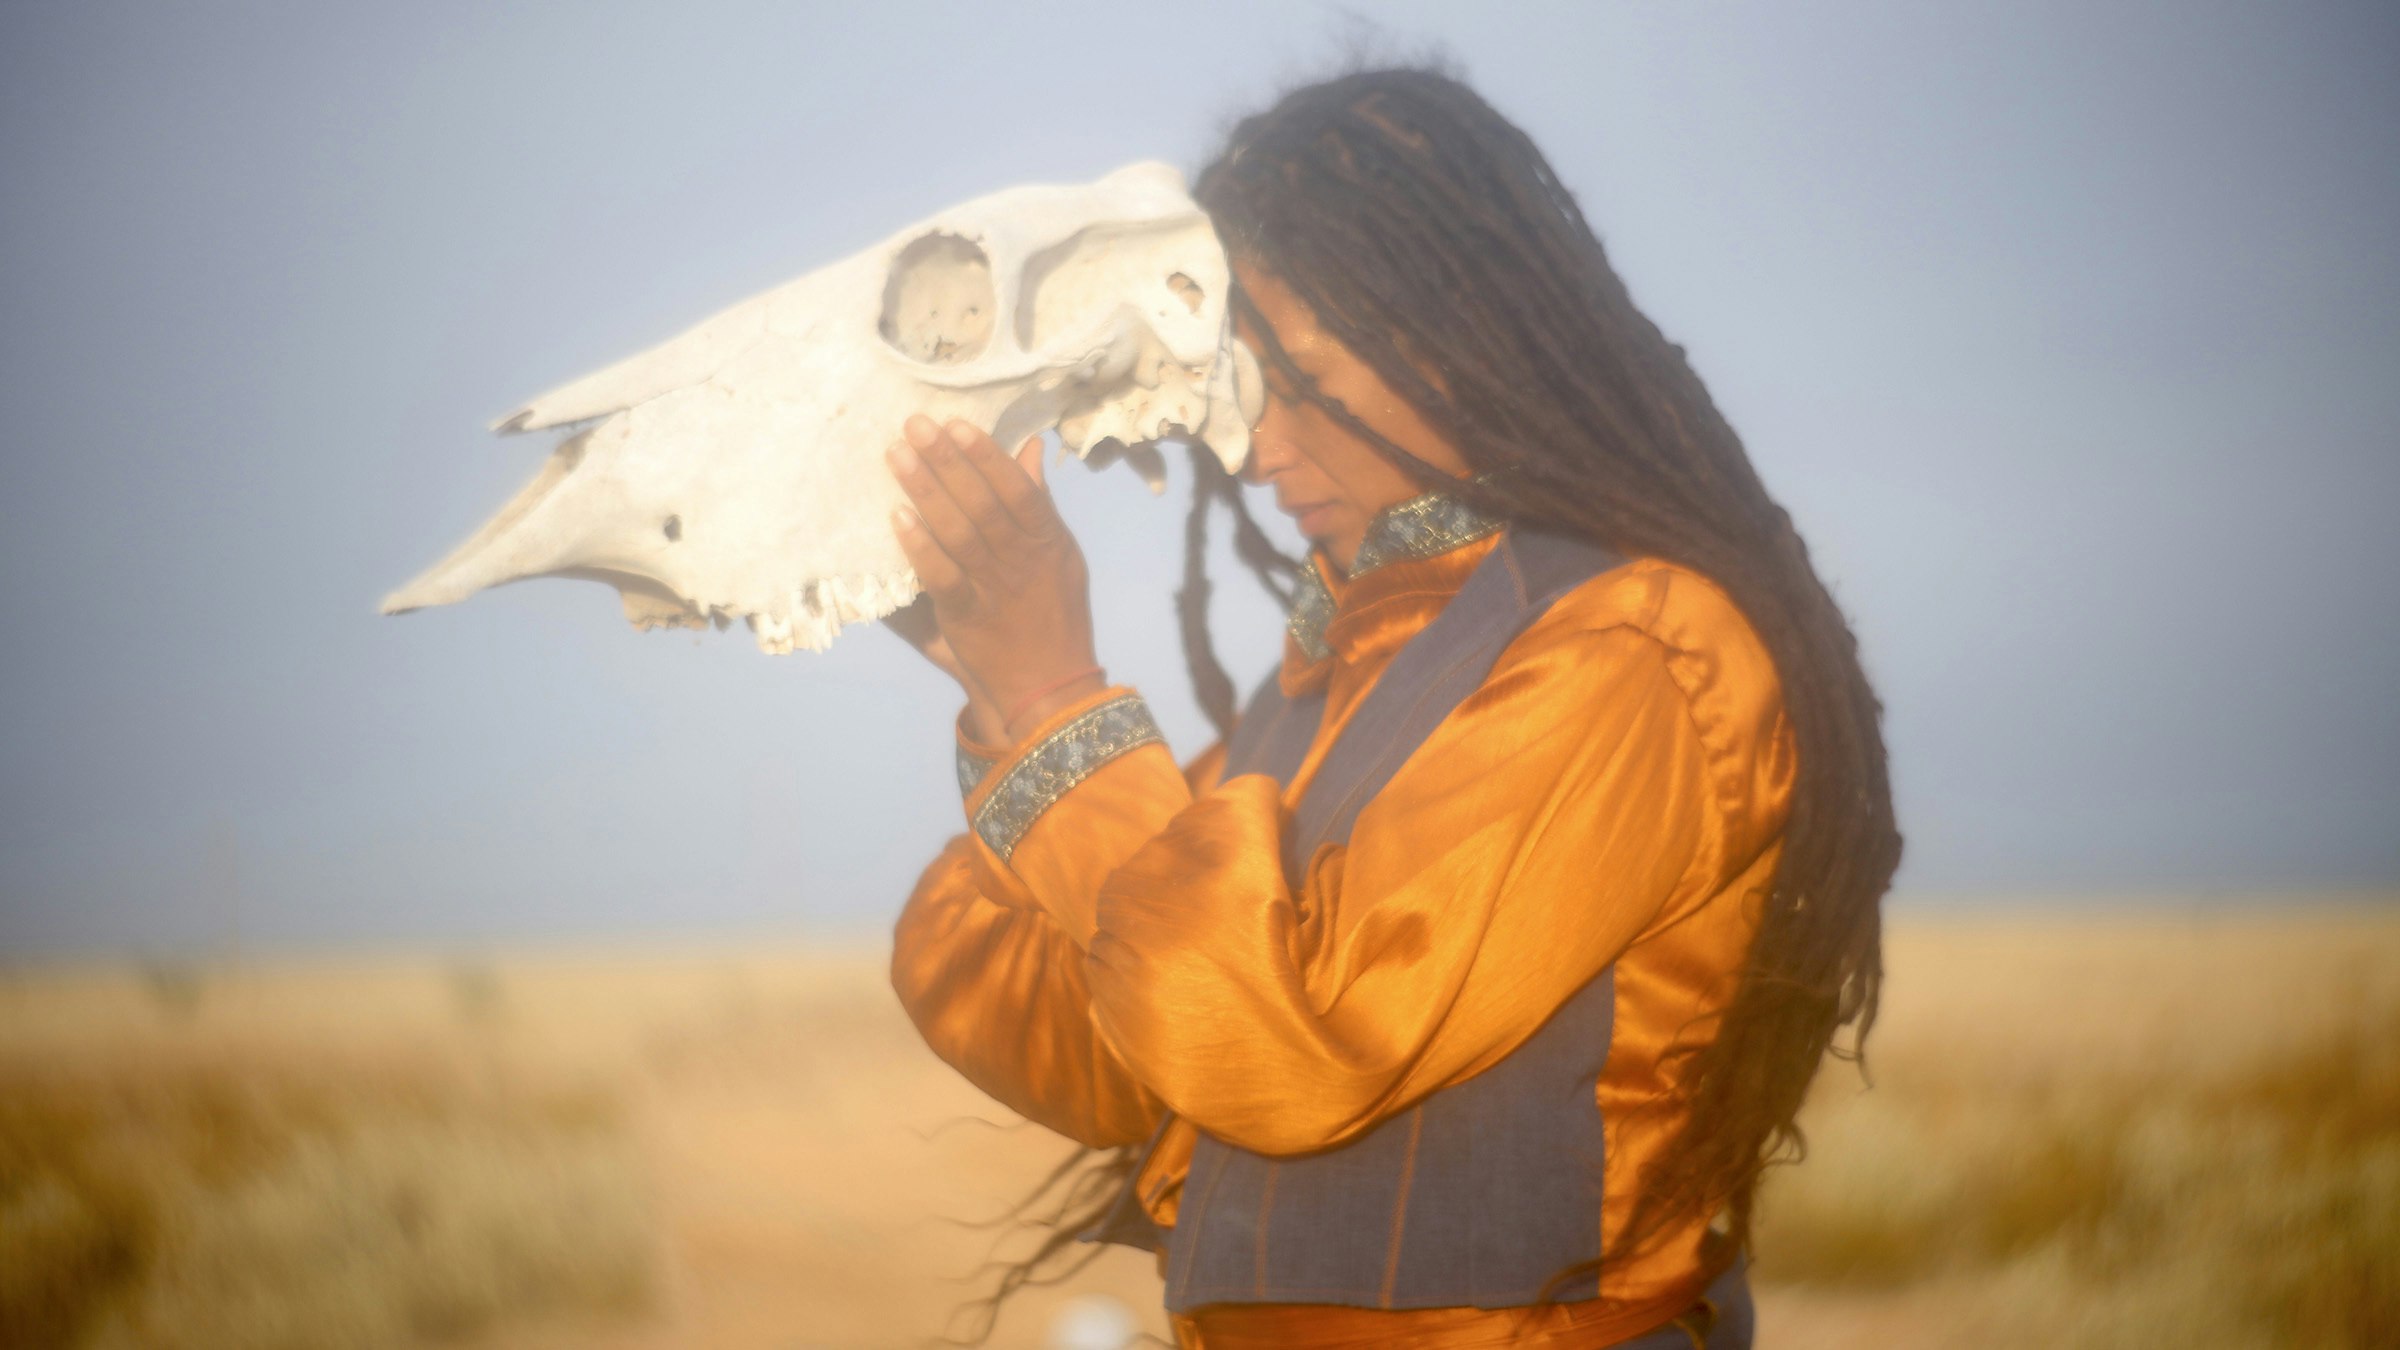 A photograph of a human figure with eyes closed wearing an orange jumpsuit holding a large white animal skull to her head.